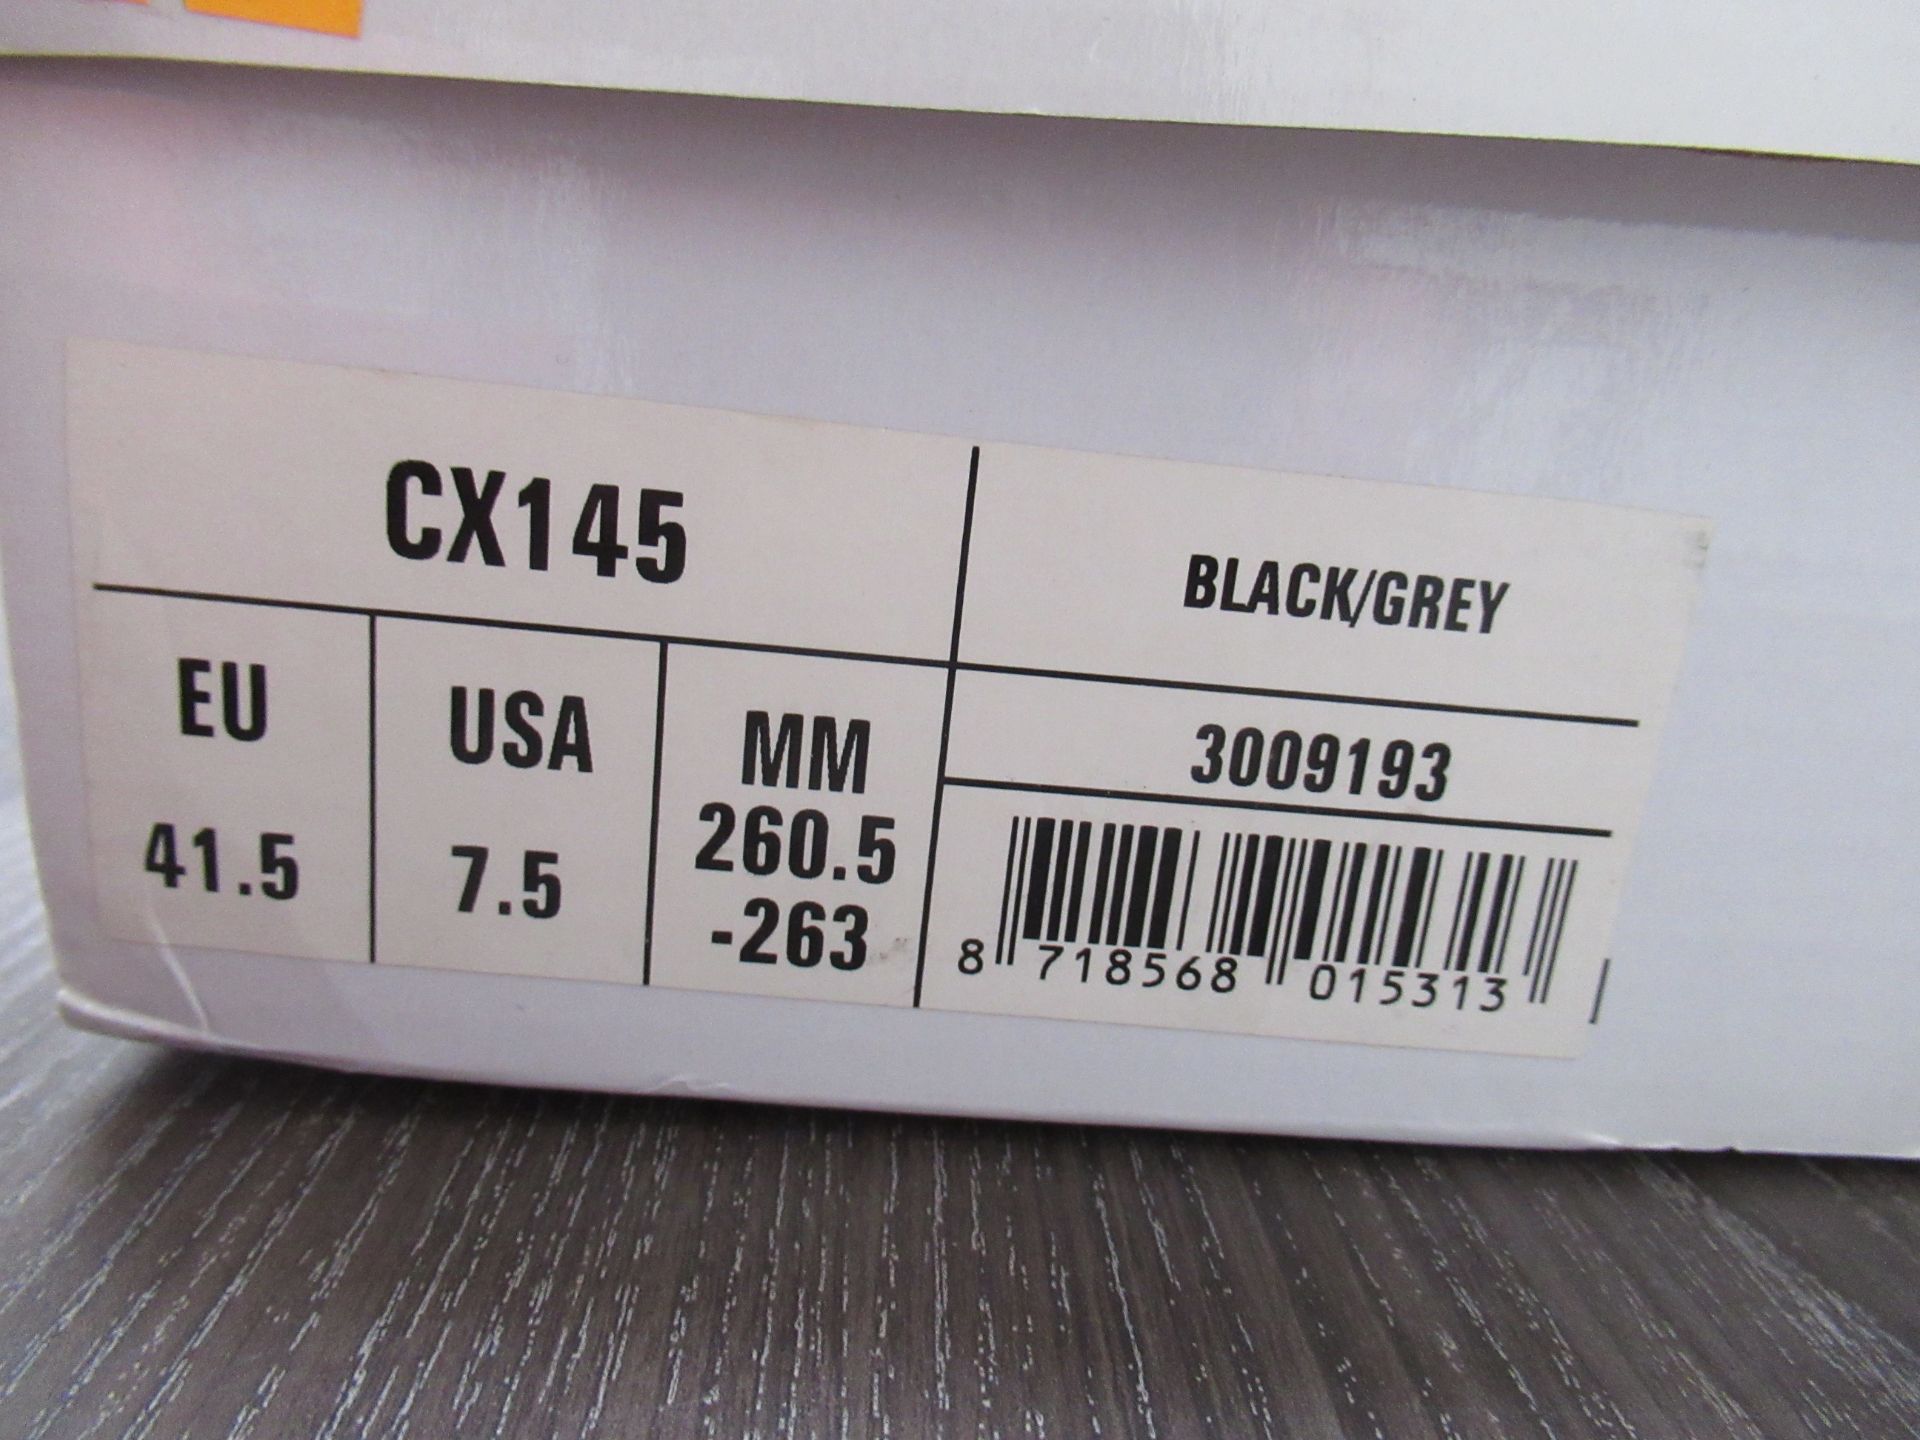 Pair of Lake CX145 cycling boots (black/grey) - boxed EU size 41.5 (RRP£200) - Image 4 of 4